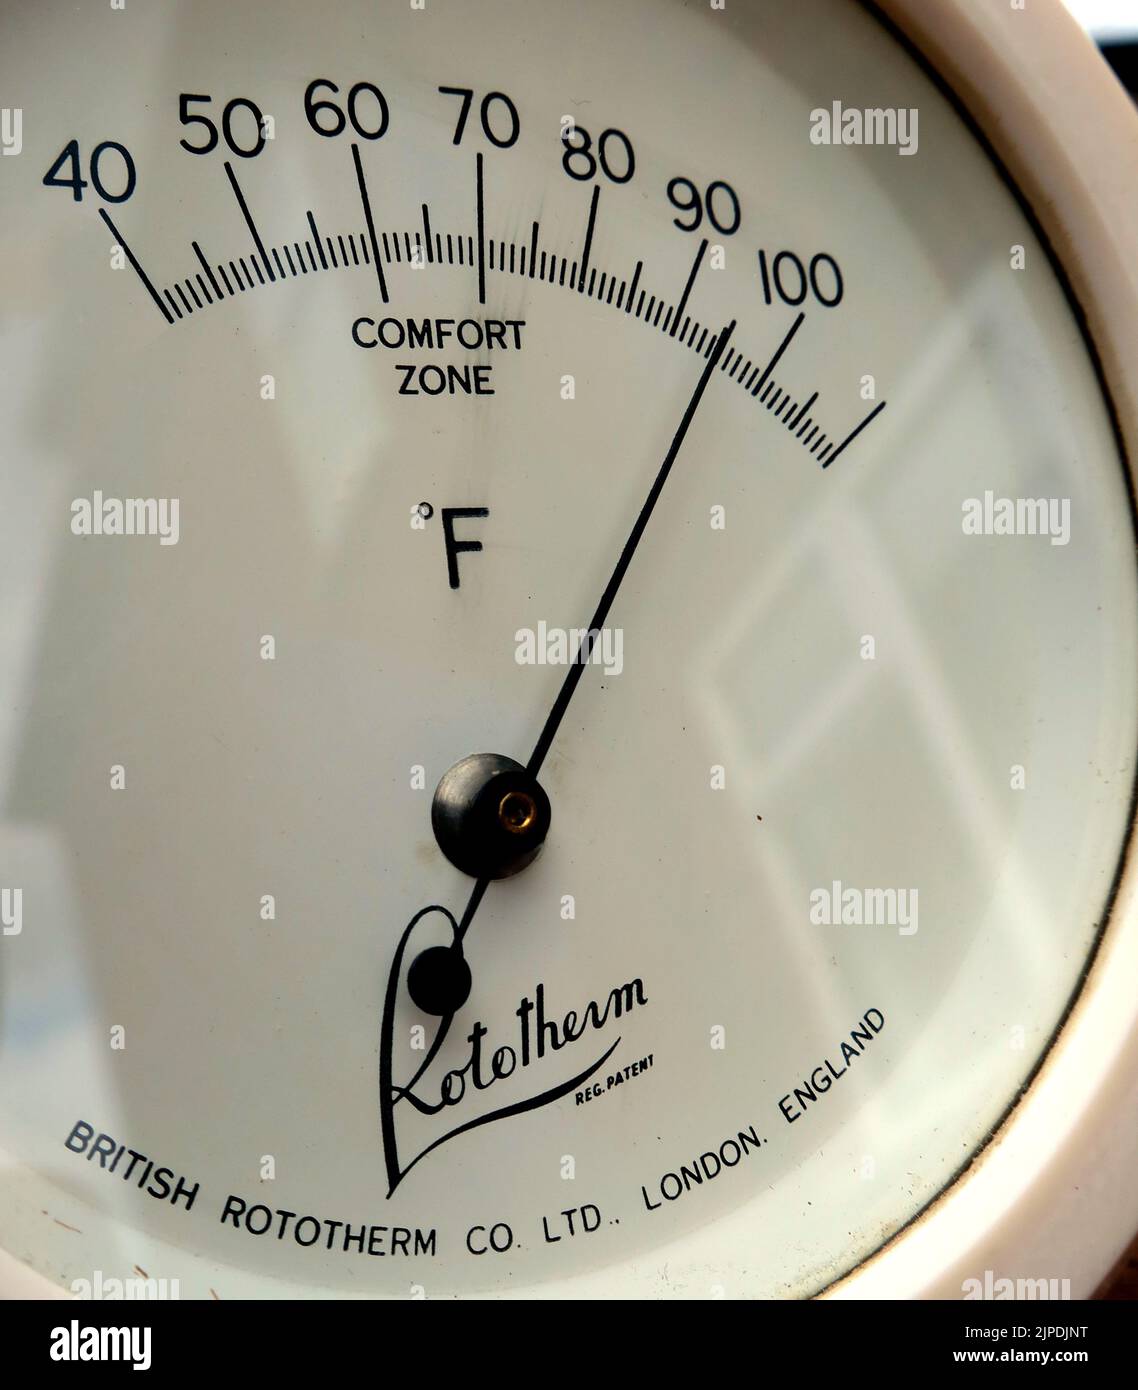 https://c8.alamy.com/comp/2JPDJNT/thermometer-reading-over-90degrees-fahrenheit-outside-the-comfort-zone-hotter-summers-measured-on-a-rototherm-guage-in-cheshire-2JPDJNT.jpg